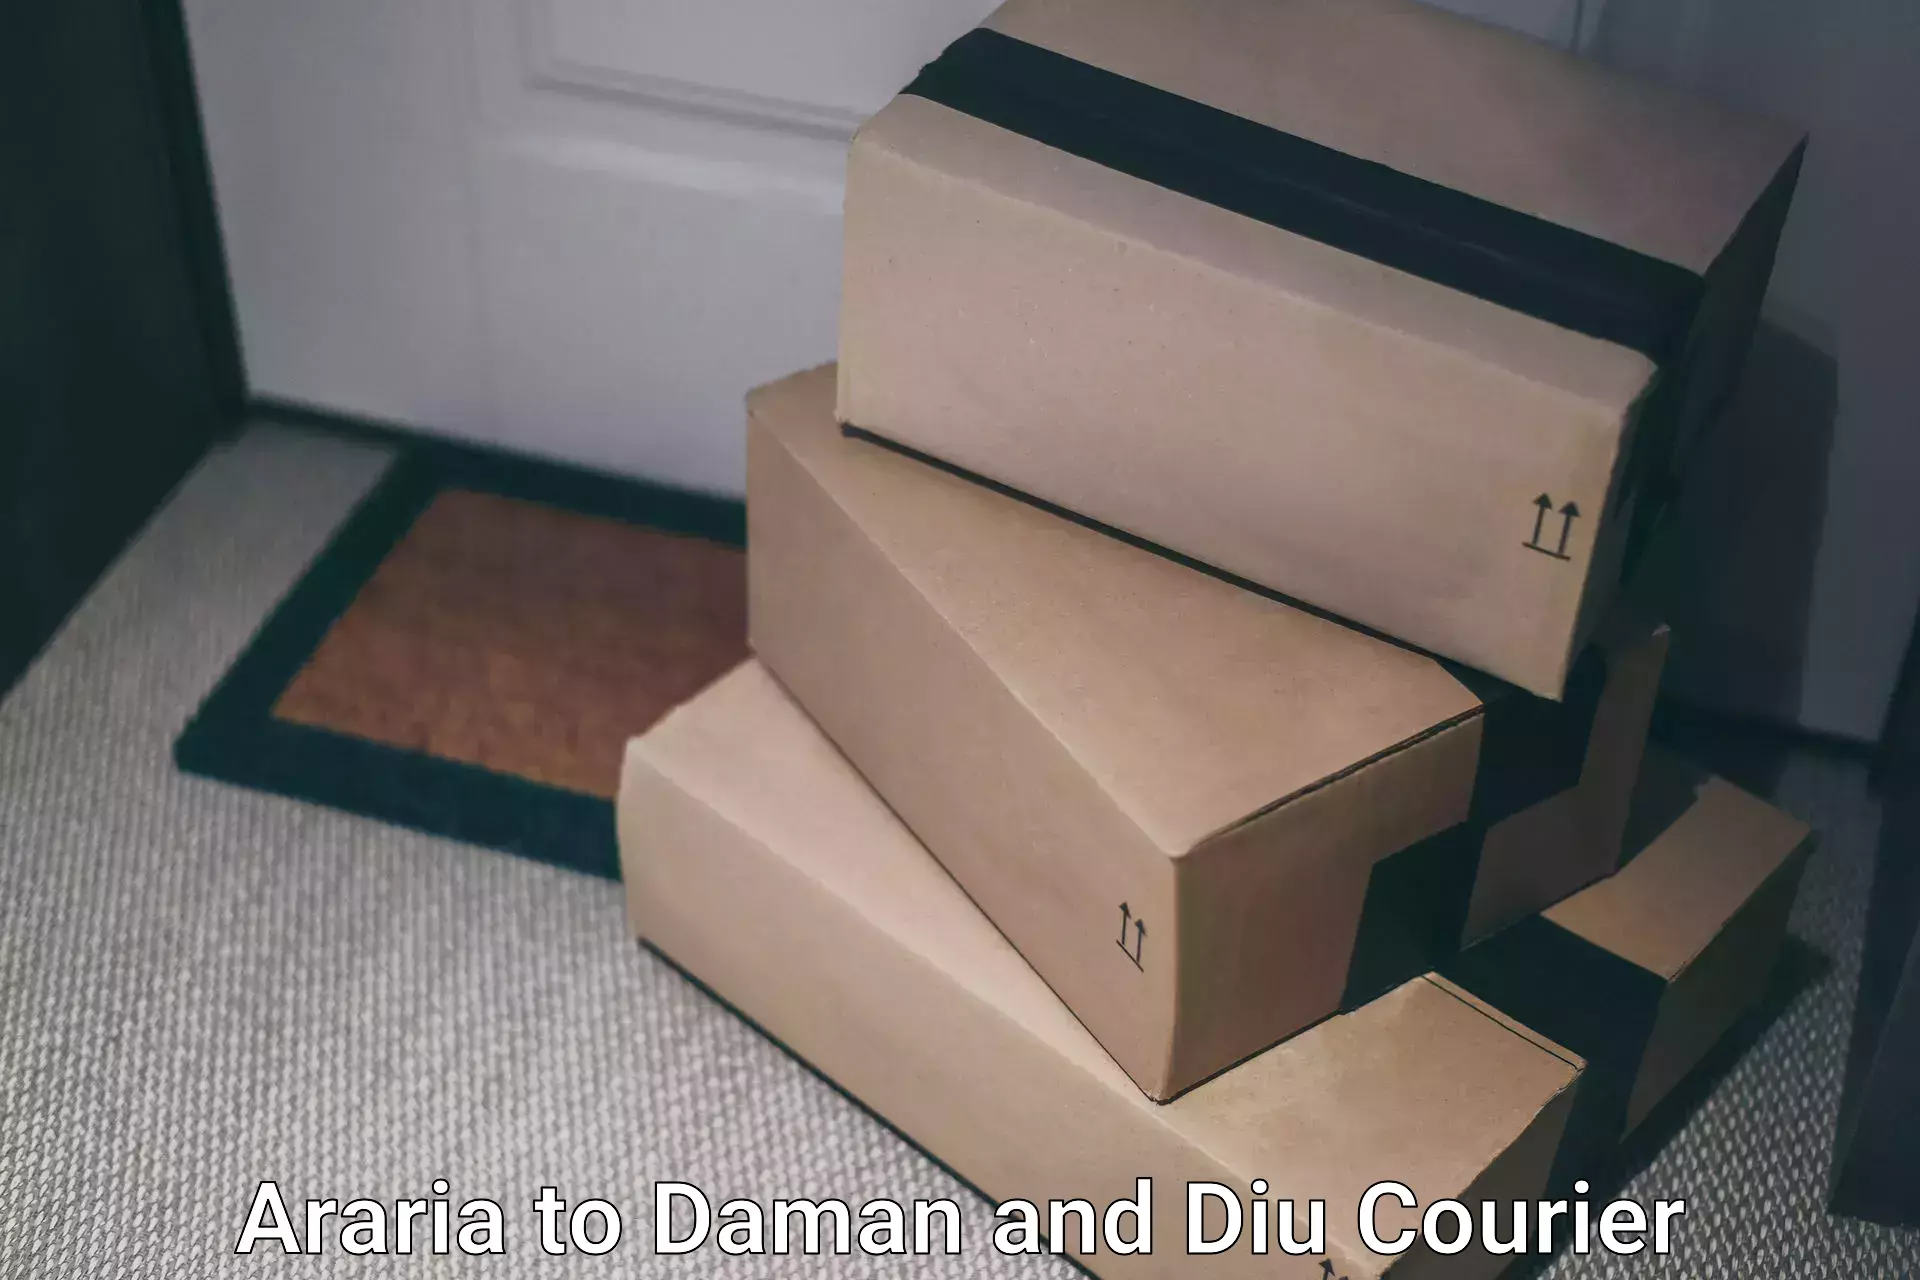 Parcel service for businesses Araria to Daman and Diu